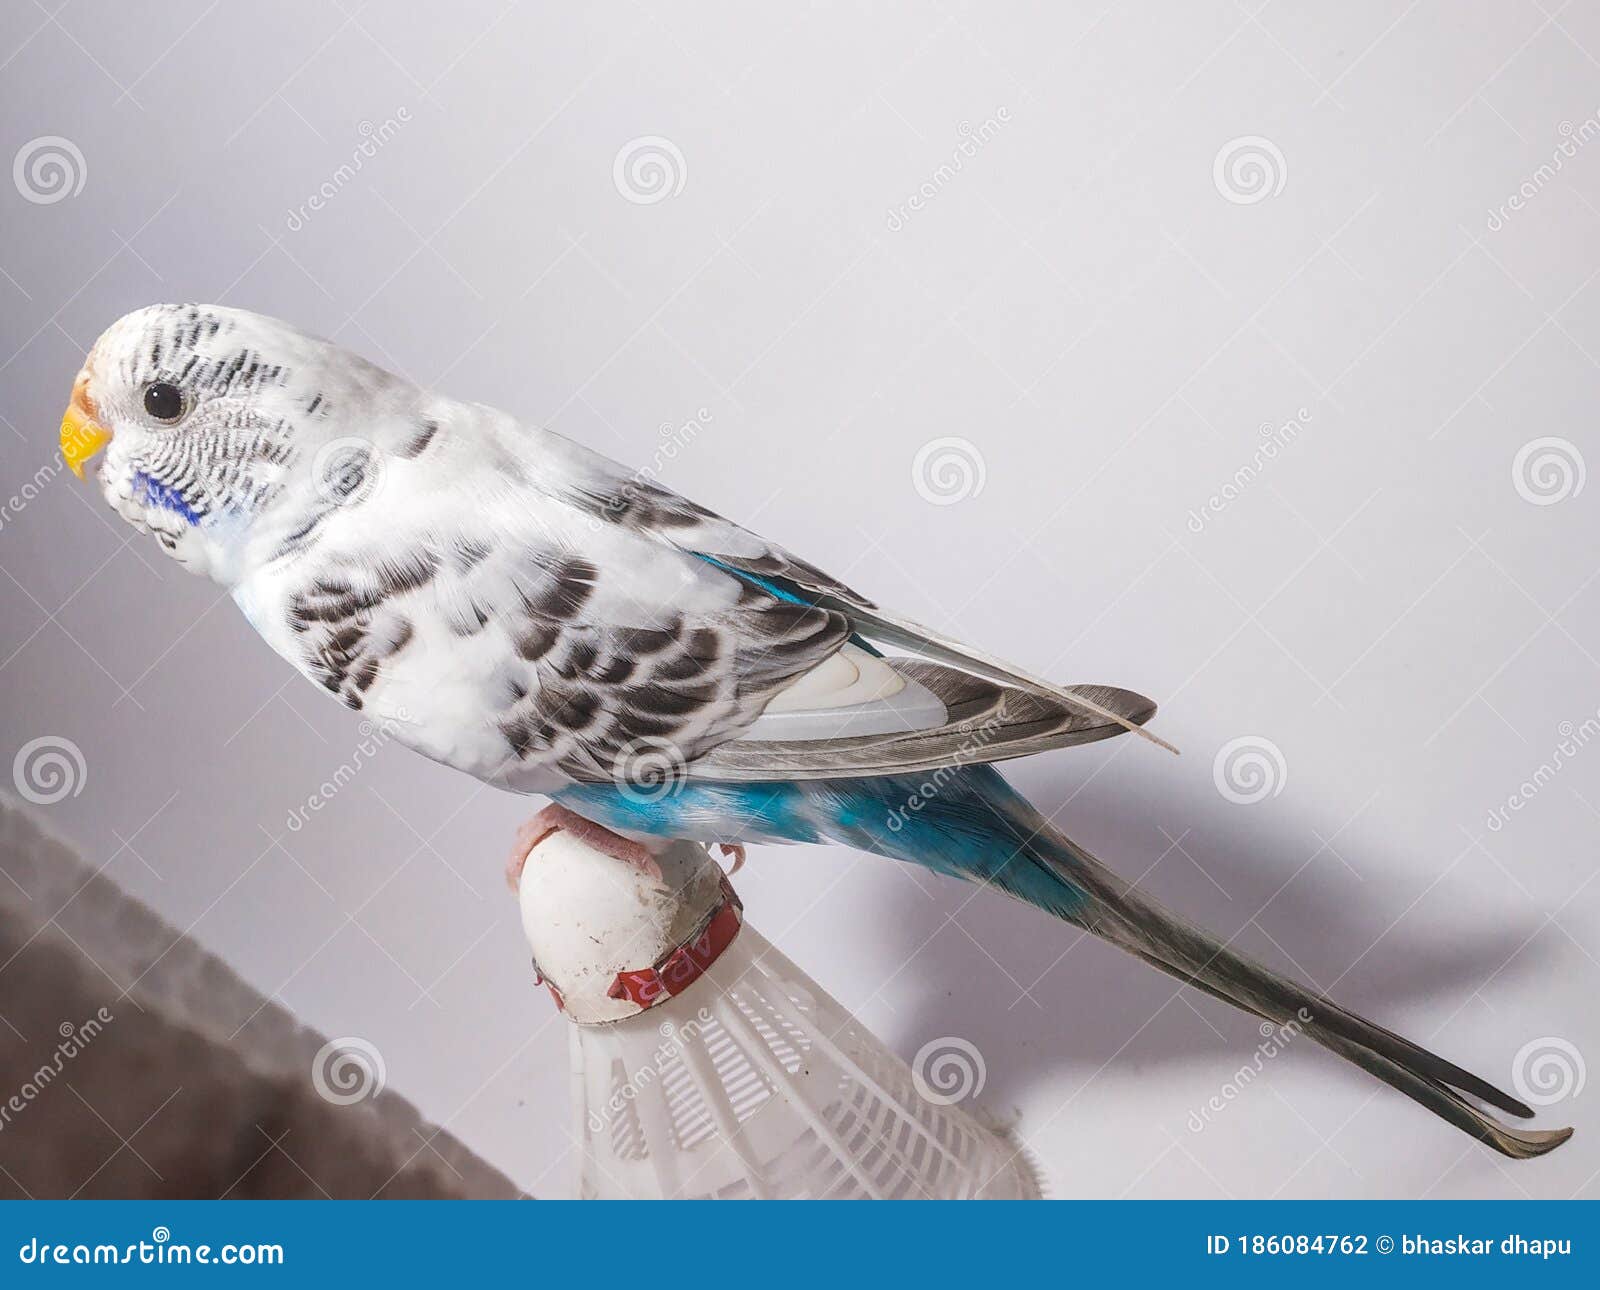 Bird Wallpaper , Blue and White Budgie Parrot on a Shuttle in White  Background. Stock Photo - Image of bird, wing: 186084762